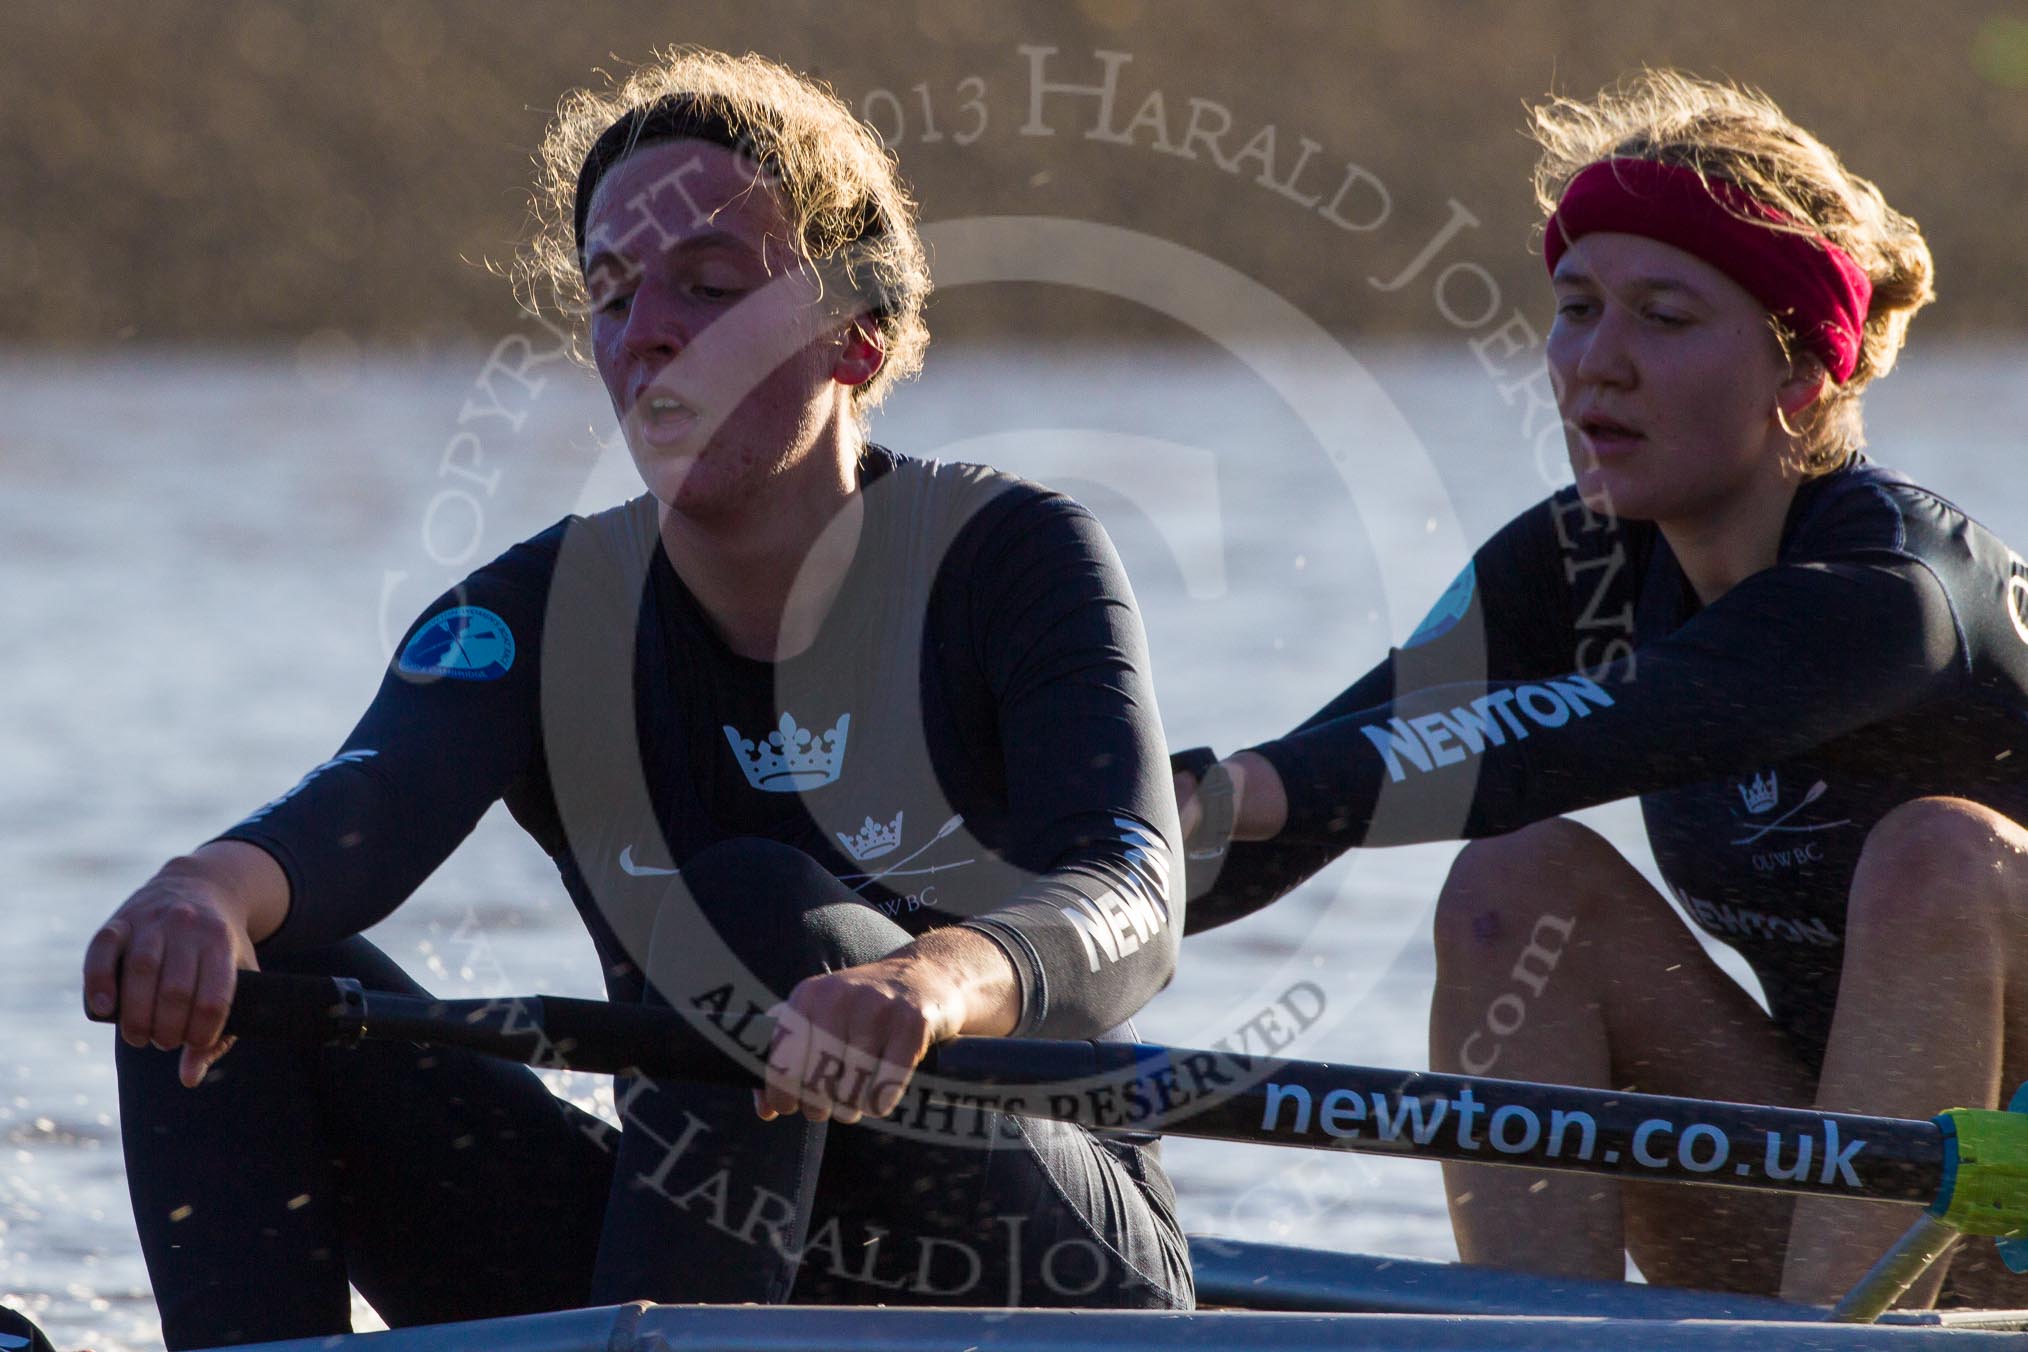 The Boat Race season 2014 - Women's Trial VIIIs (OUWBC, Oxford): Boudicca: C Stroke Anastasia Chitty, 7 Maxie Scheske..
River Thames between Putney Bridge and Mortlake,
London SW15,

United Kingdom,
on 19 December 2013 at 12:58, image #188